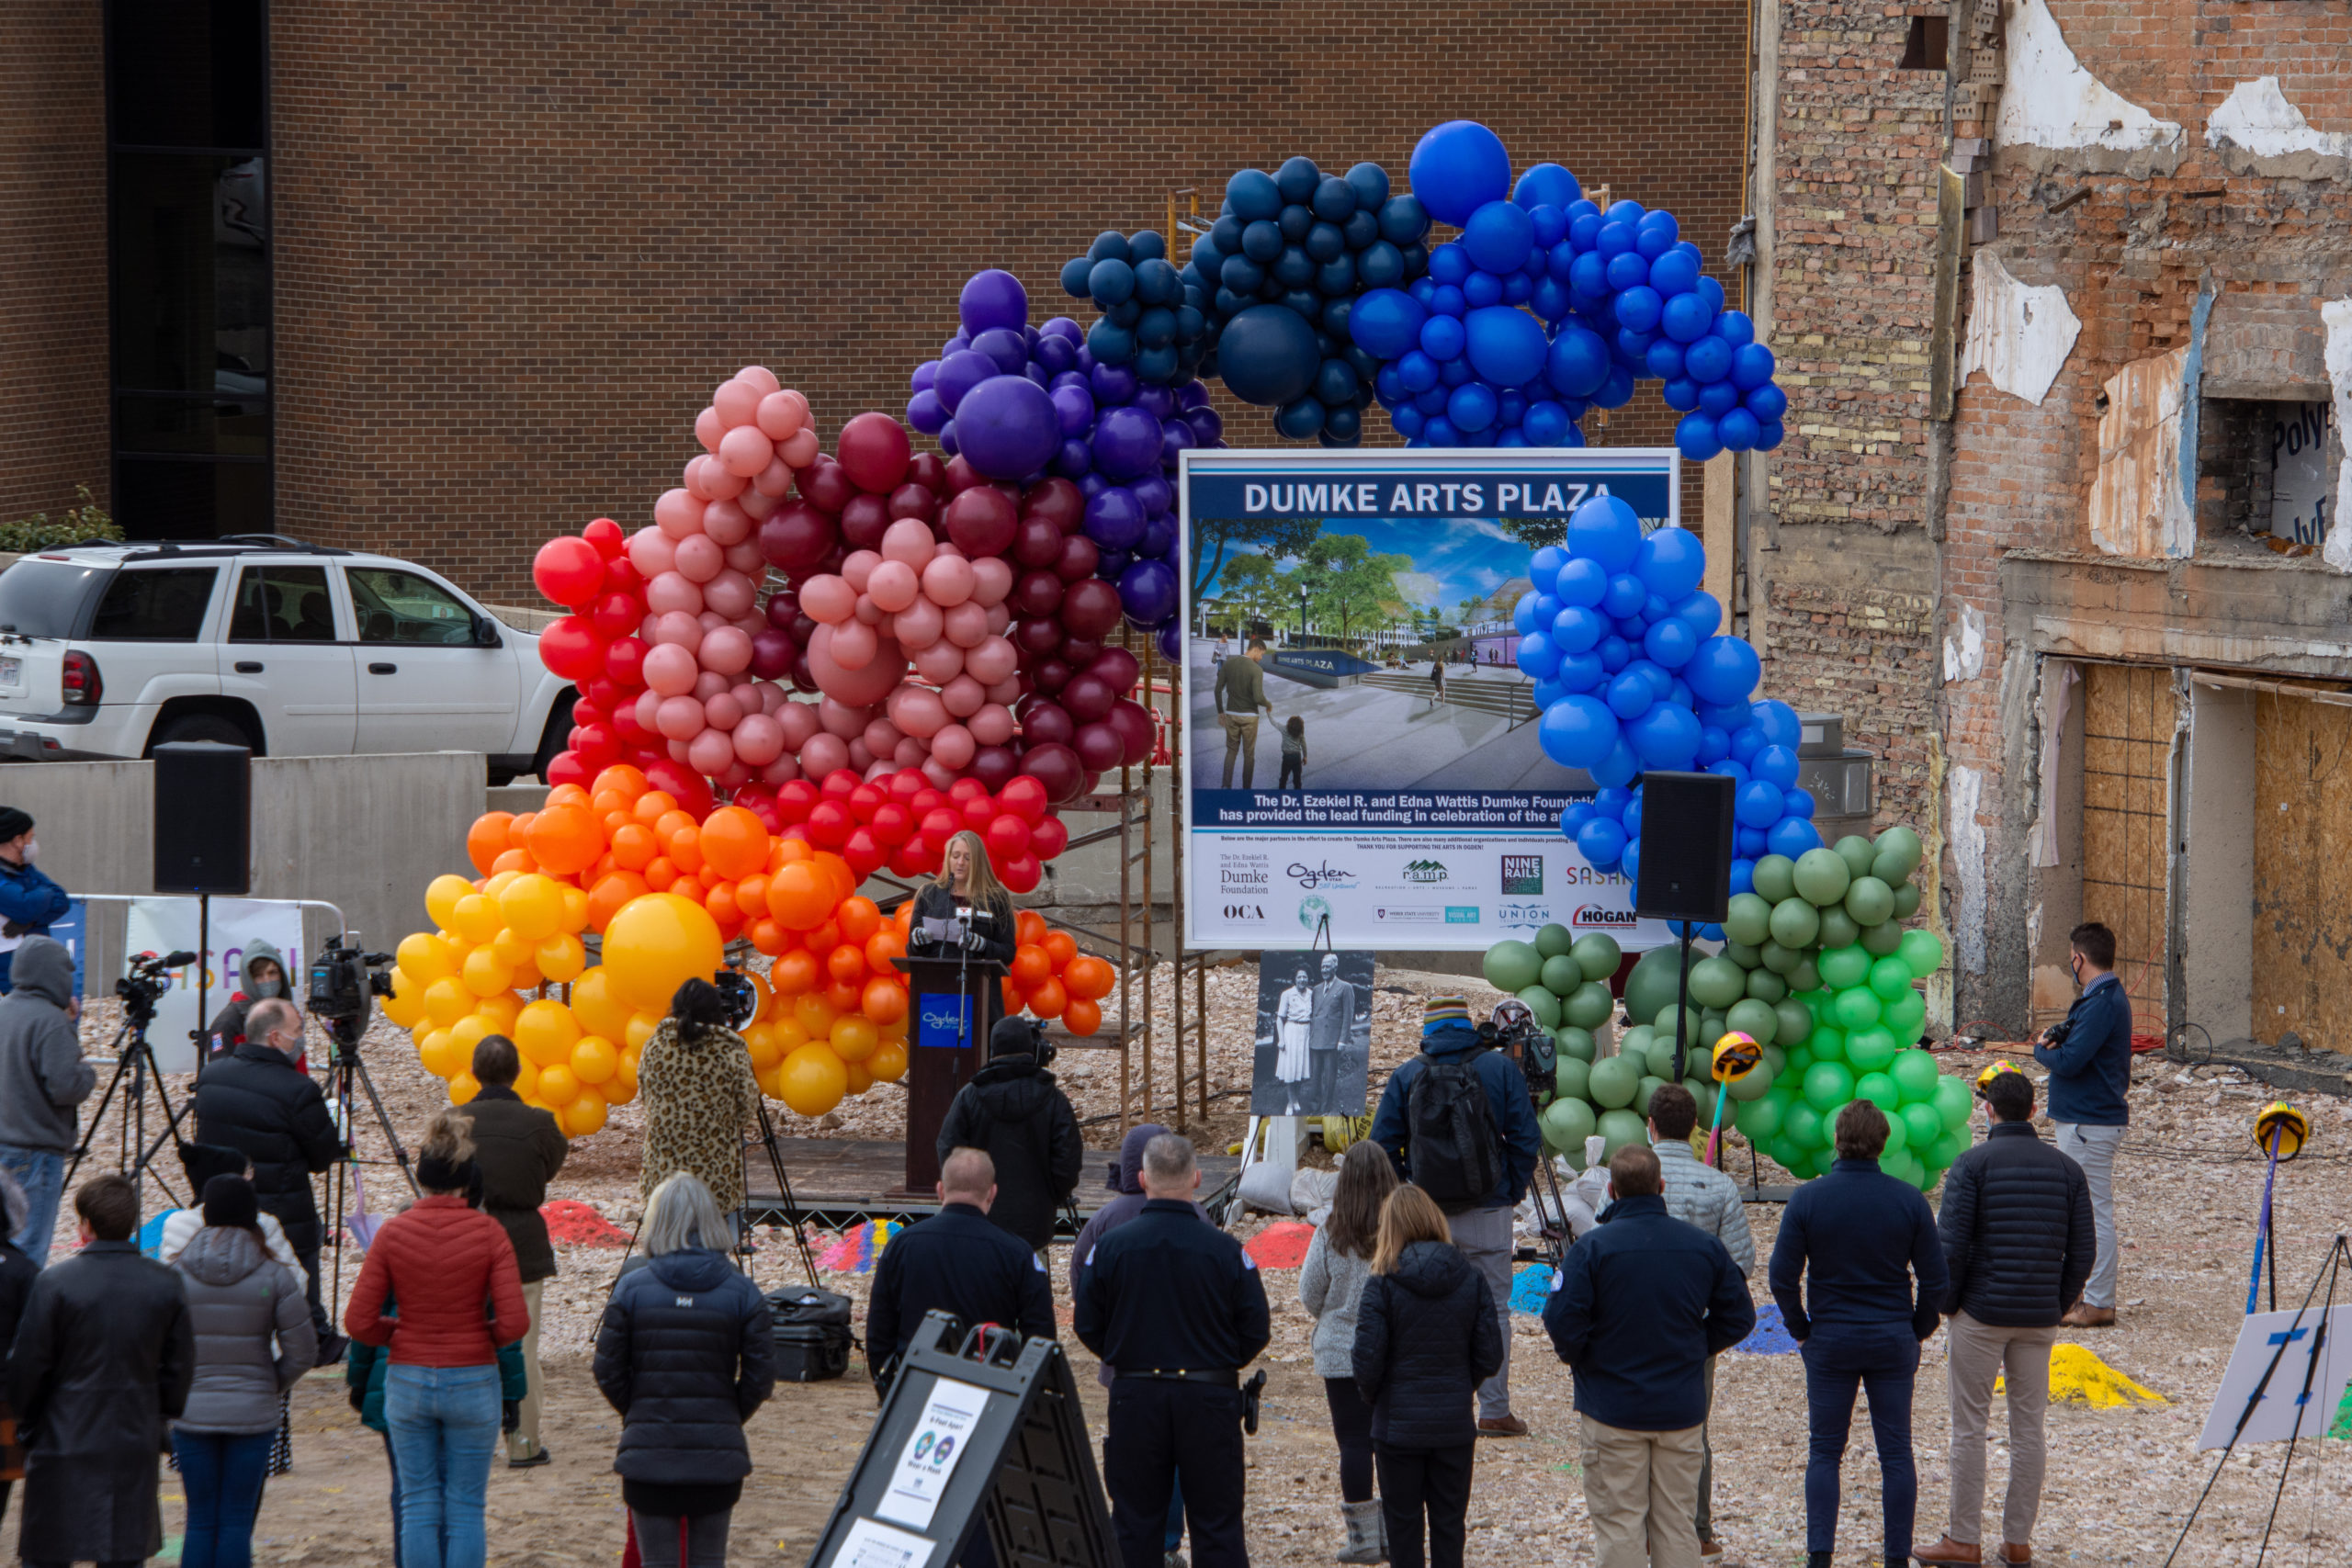 People socially distant at outdoor groundbreaking event with lots of rainbow balloons